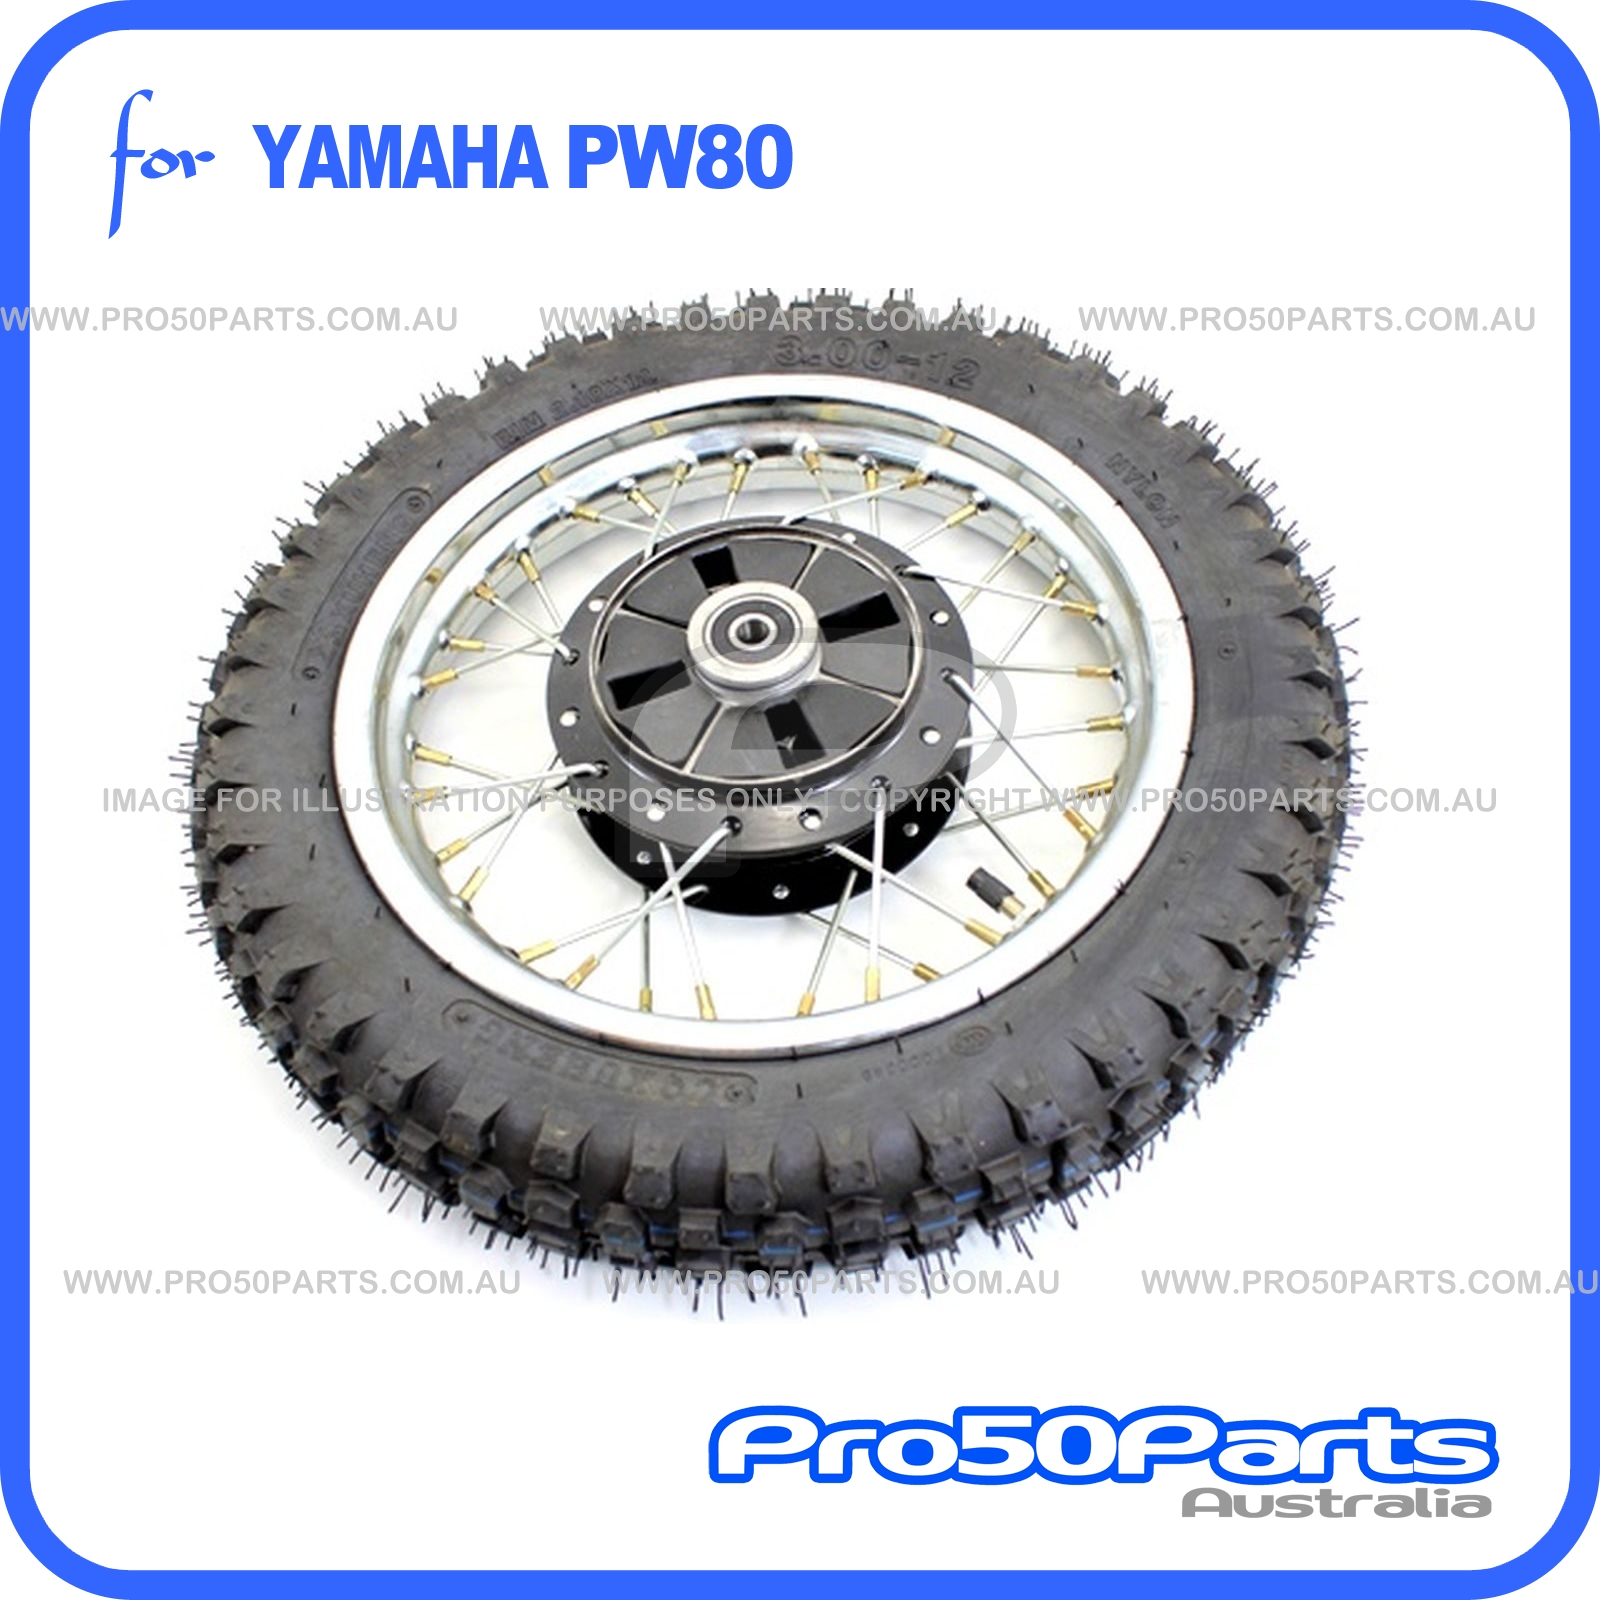 For YAMAHA PW80 PY80 PEEWEE Front BRAKE SHOES 80 PW PY PW80 DRUM BIKE TDR